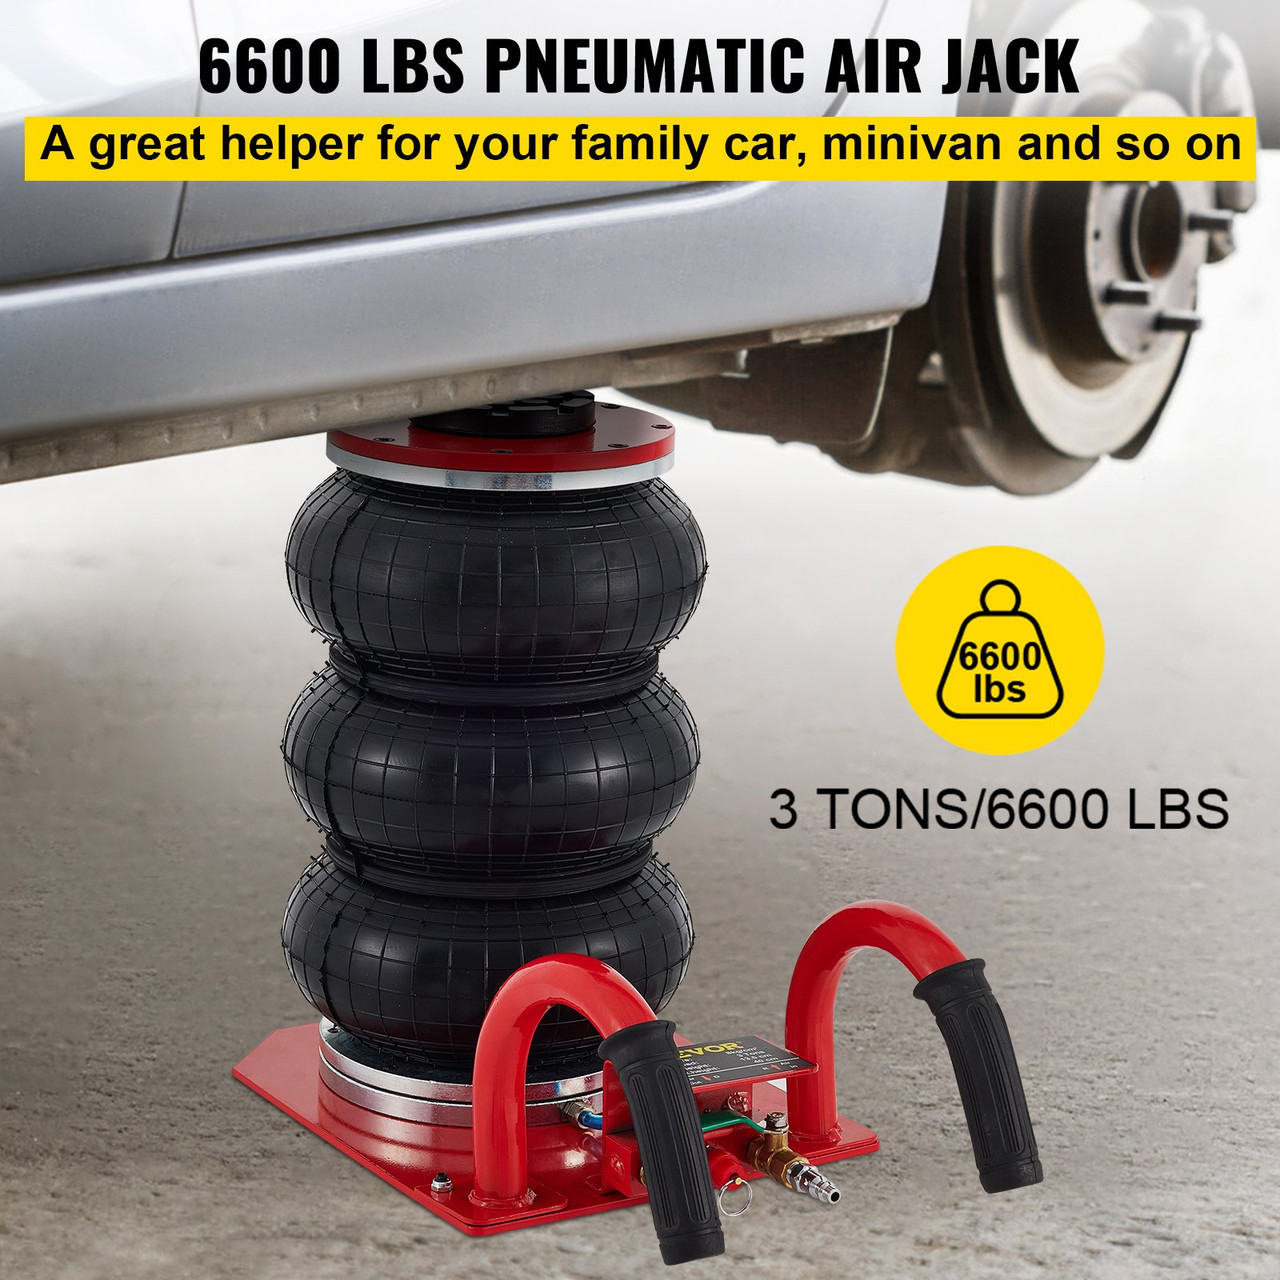 Triple Bag Air Jack, 3 Ton (6600 lbs) Capacity, Portable Pneumatic Car Jacks, Fast Lifting up to 16 Inch Height, Heavy Duty & Quick Lifting for Garage Car Repair, Red